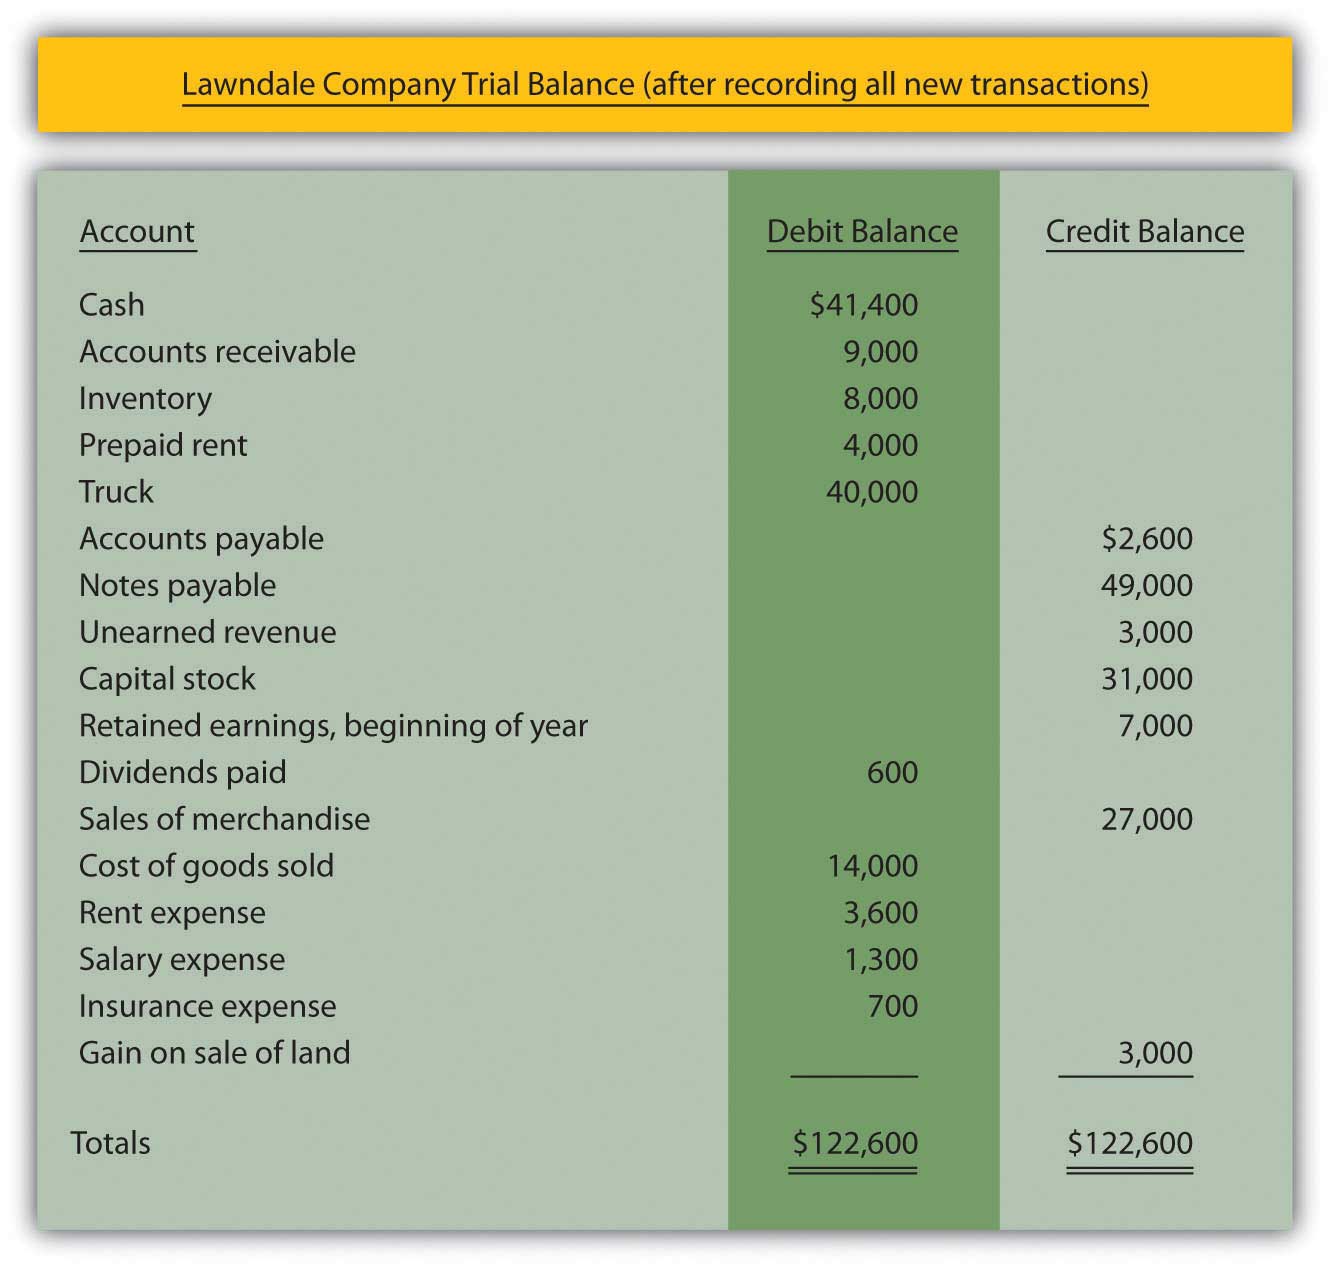 Updated Trial Balance of Lawndale Company